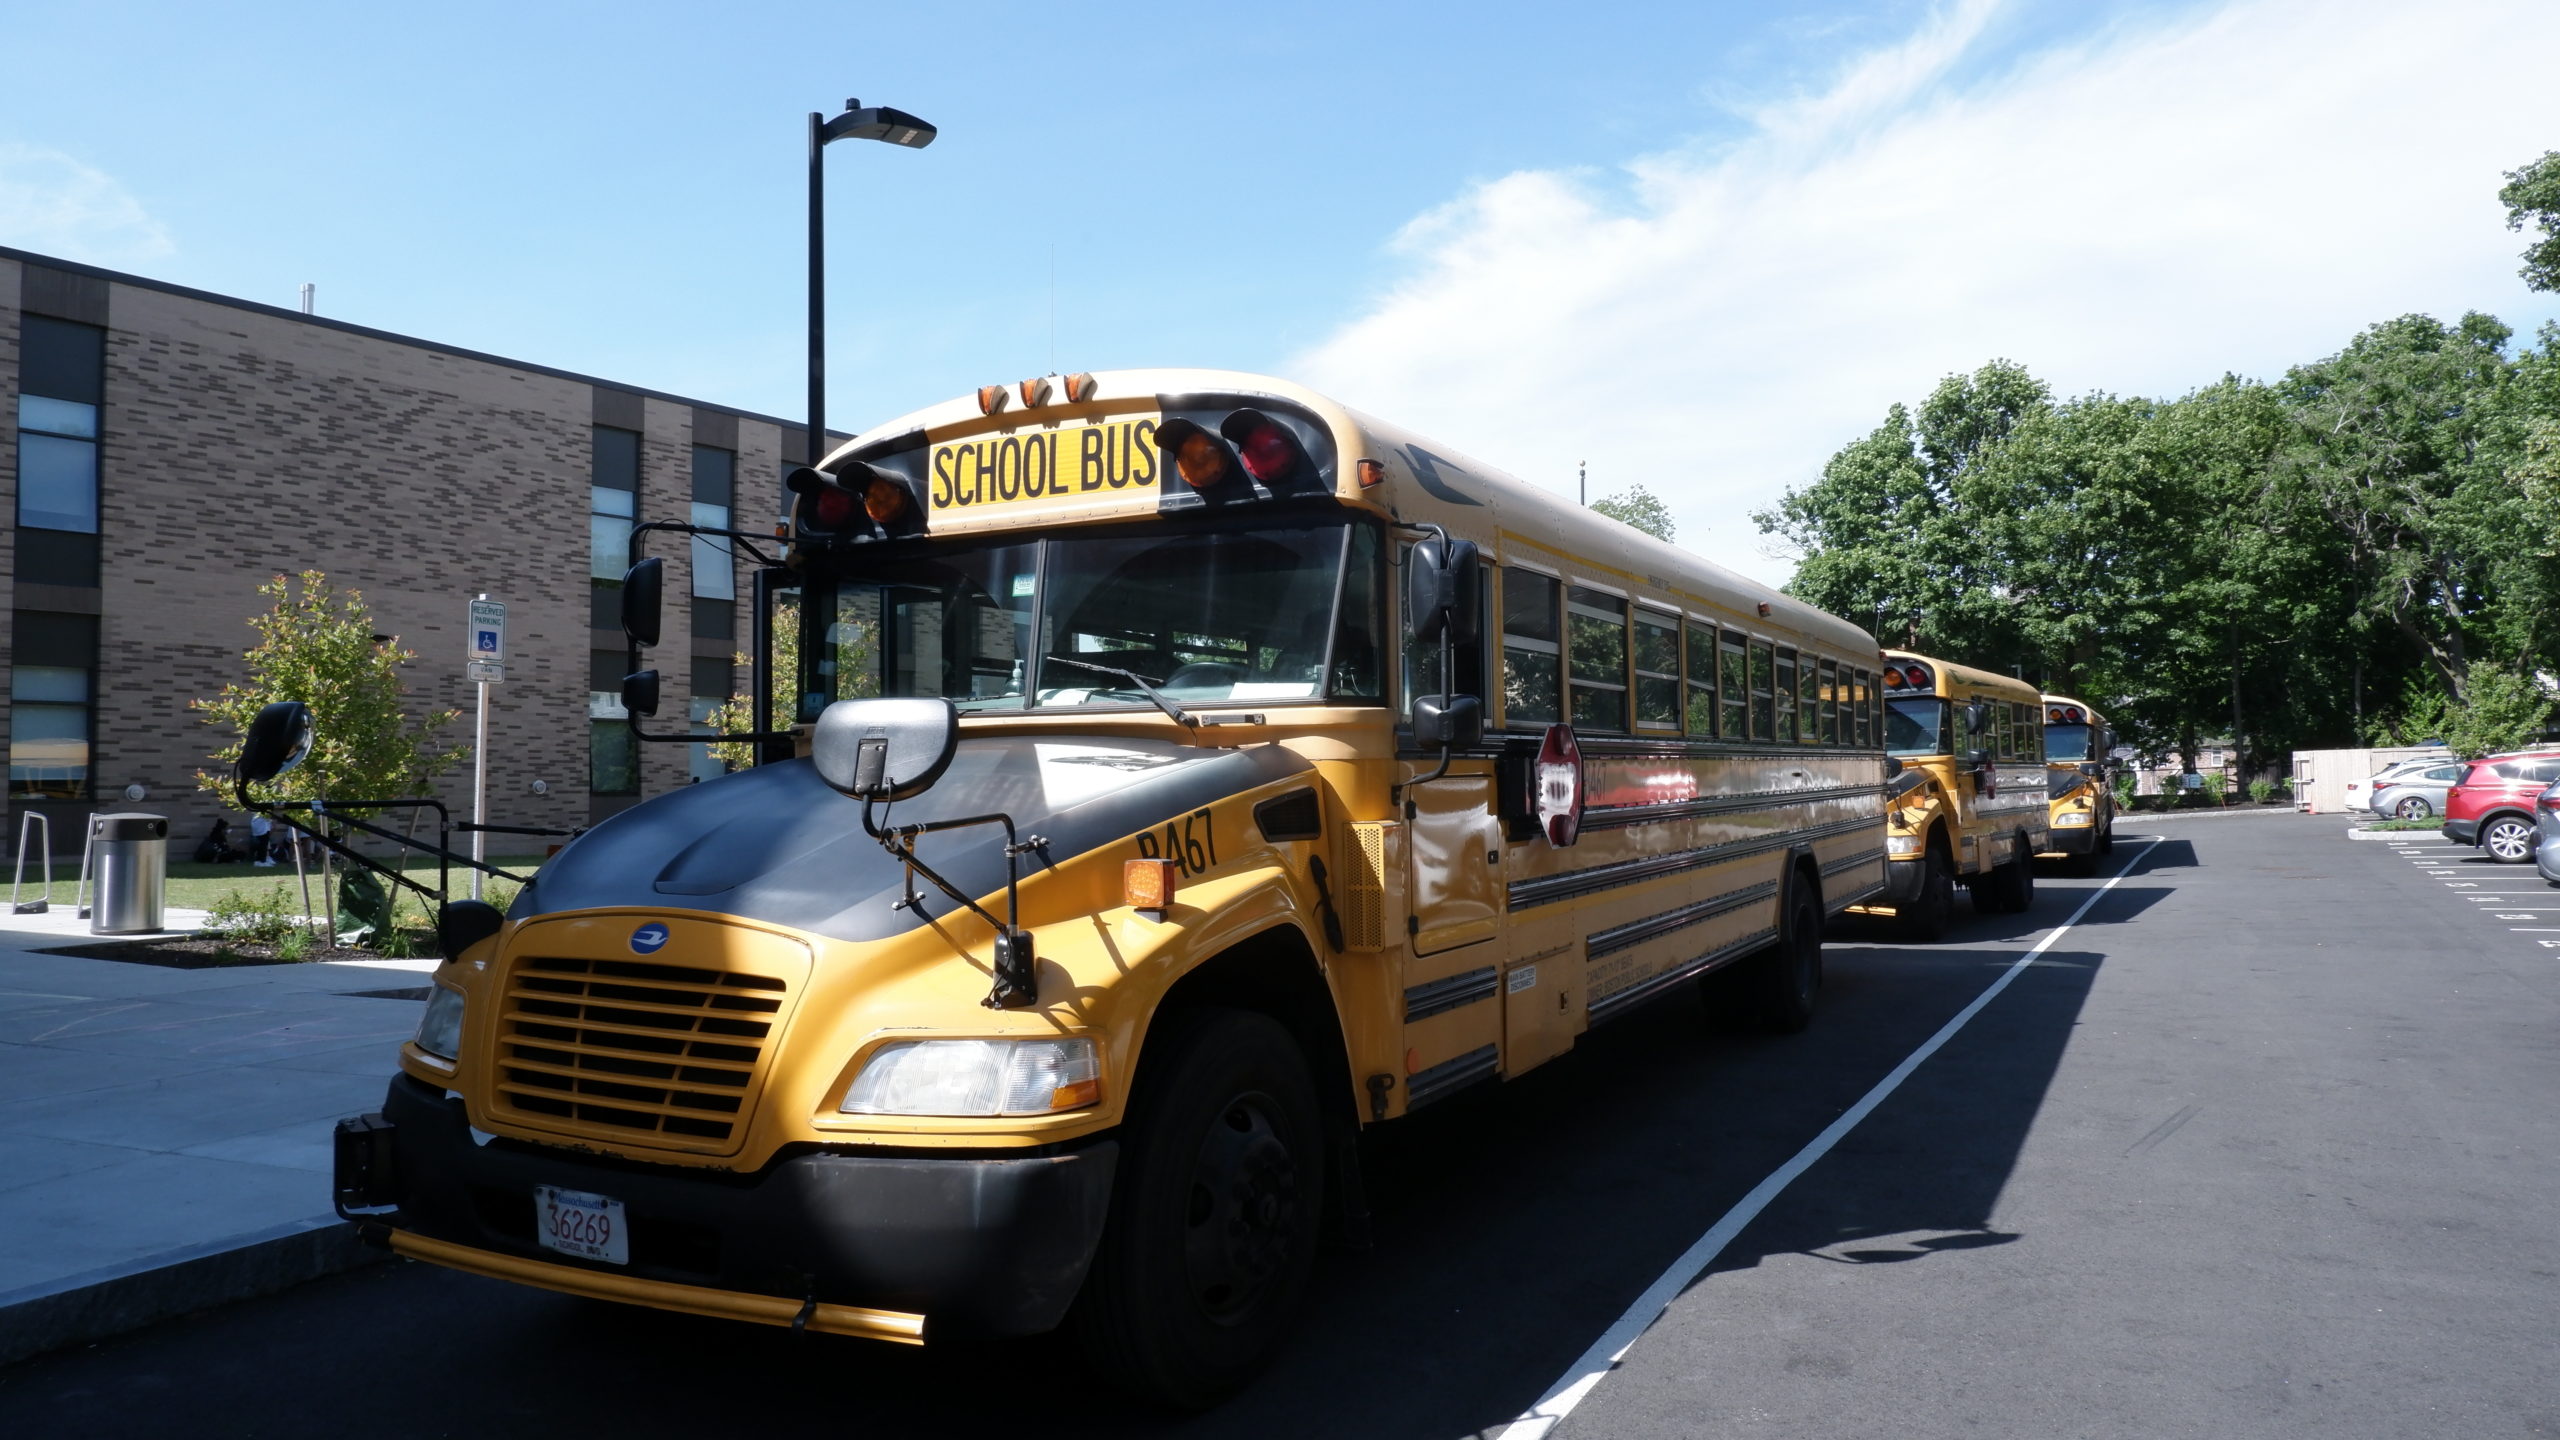 A picture of a line of school buses in front of a light colored brick building (the Upper School).